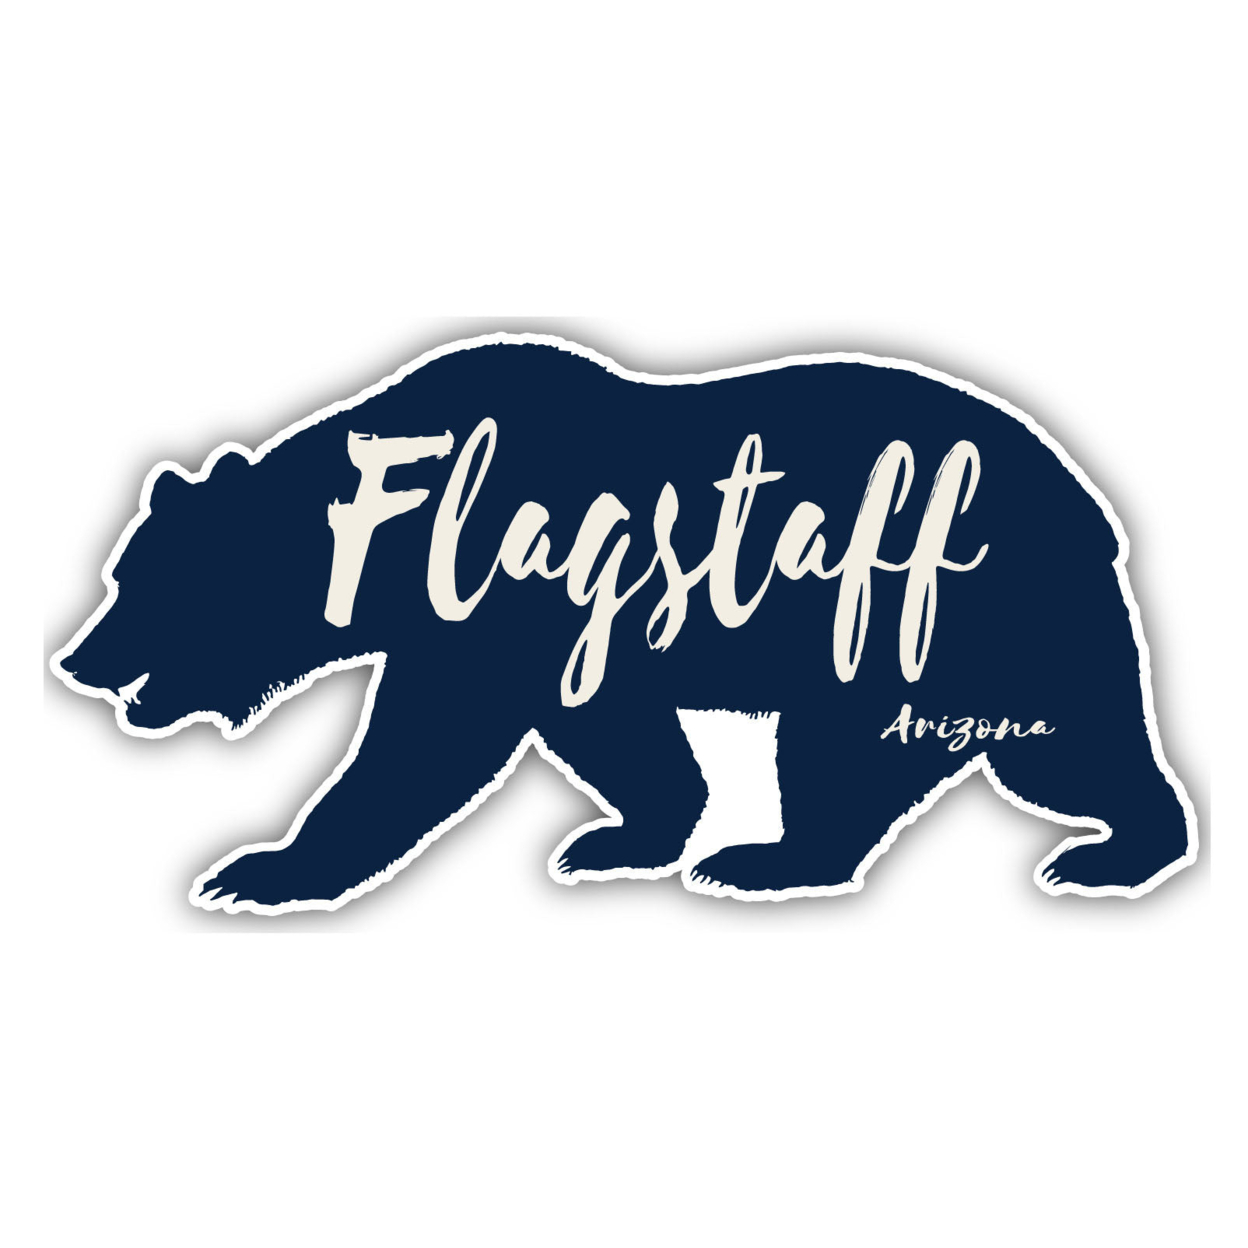 Flagstaff Arizona Souvenir Decorative Stickers (Choose Theme And Size) - 4-Pack, 12-Inch, Tent